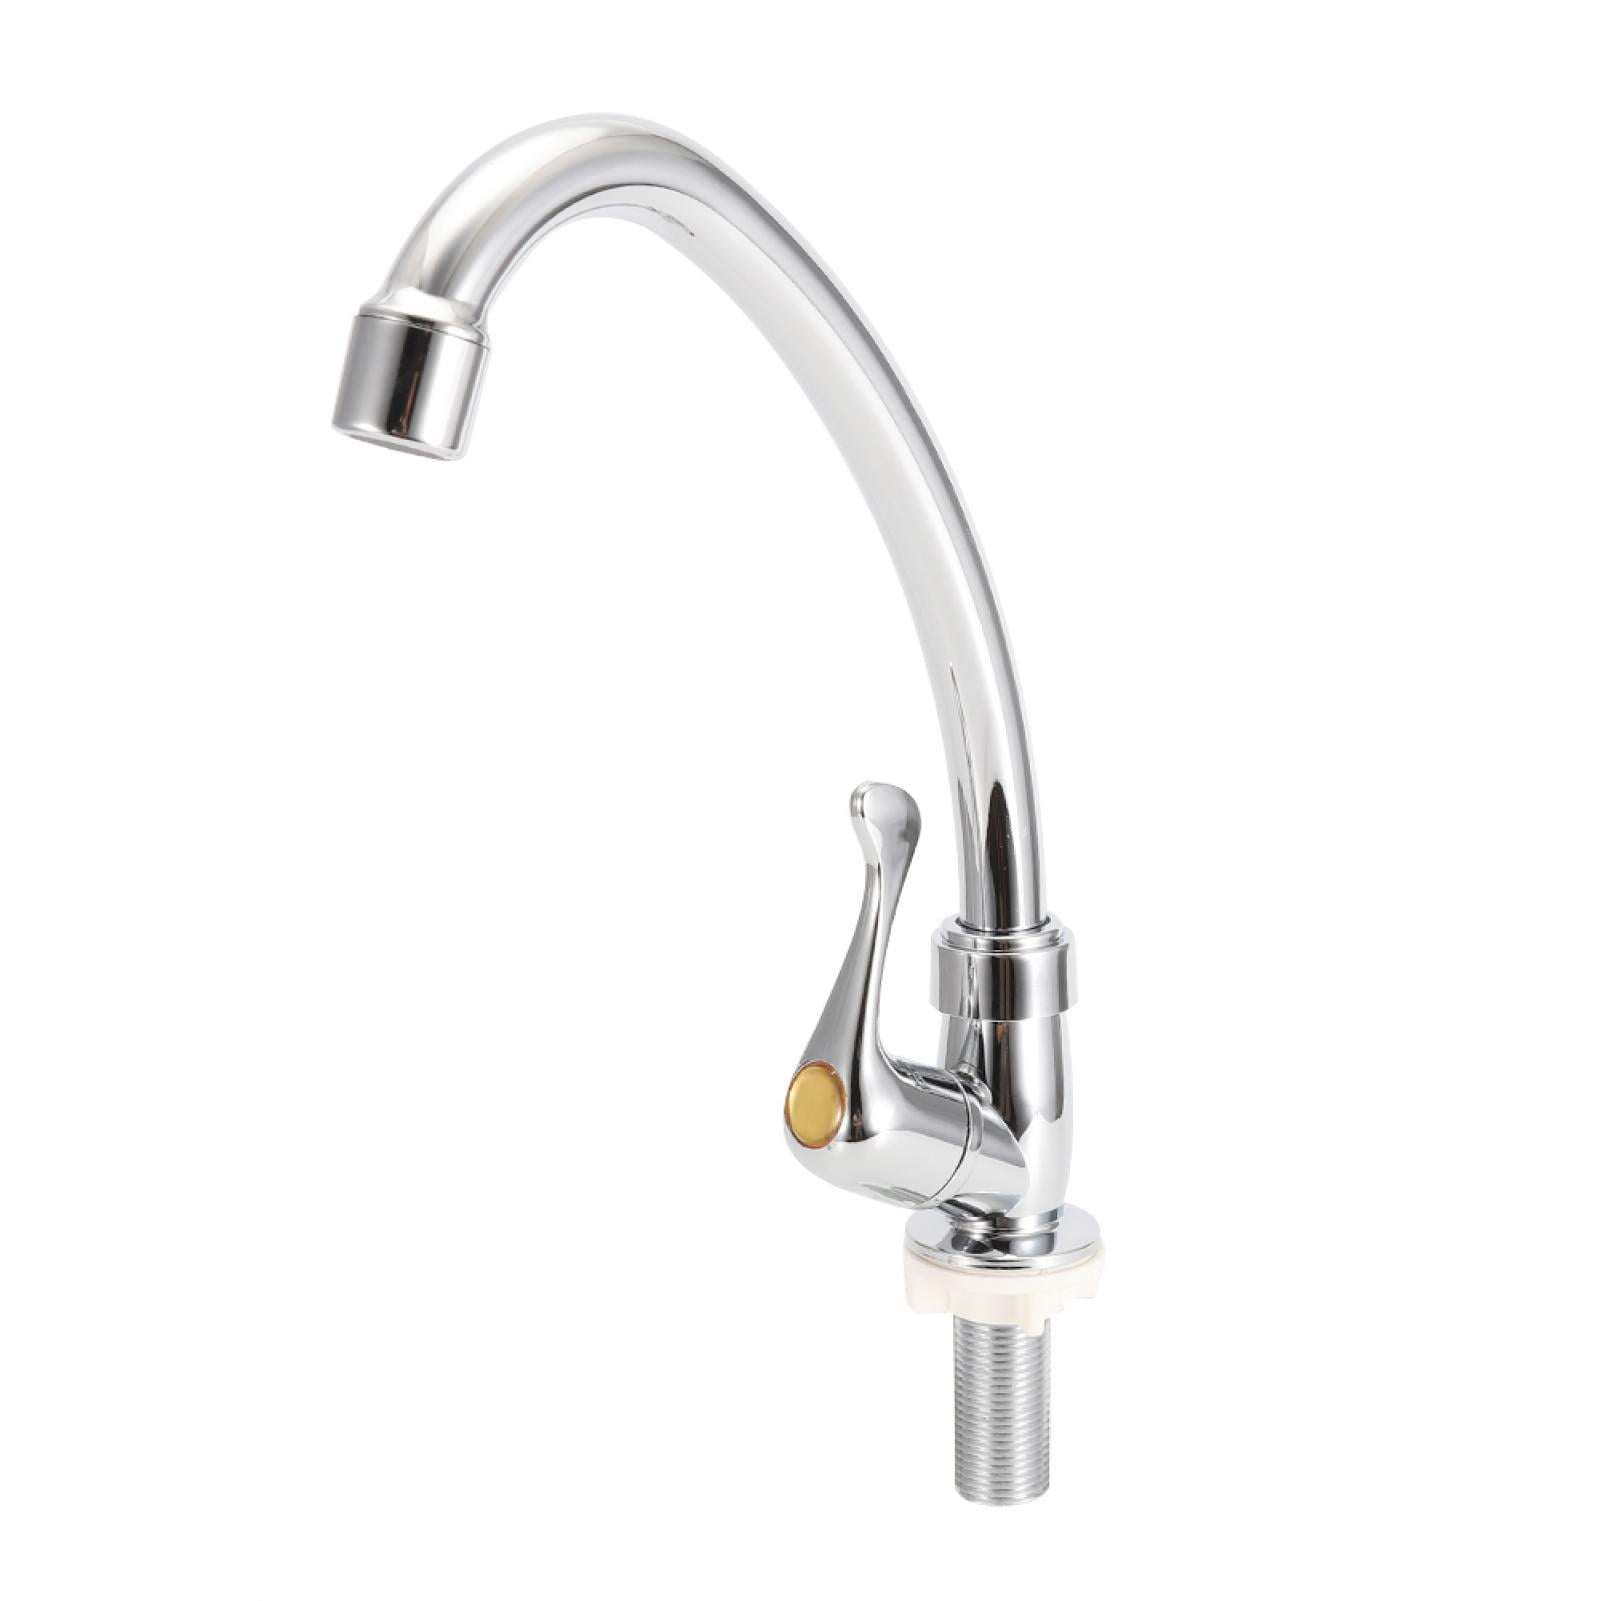 Water Faucet, Kitchen Sink Faucets Kitchen Faucet, For Kitchen Sink Water  Sink